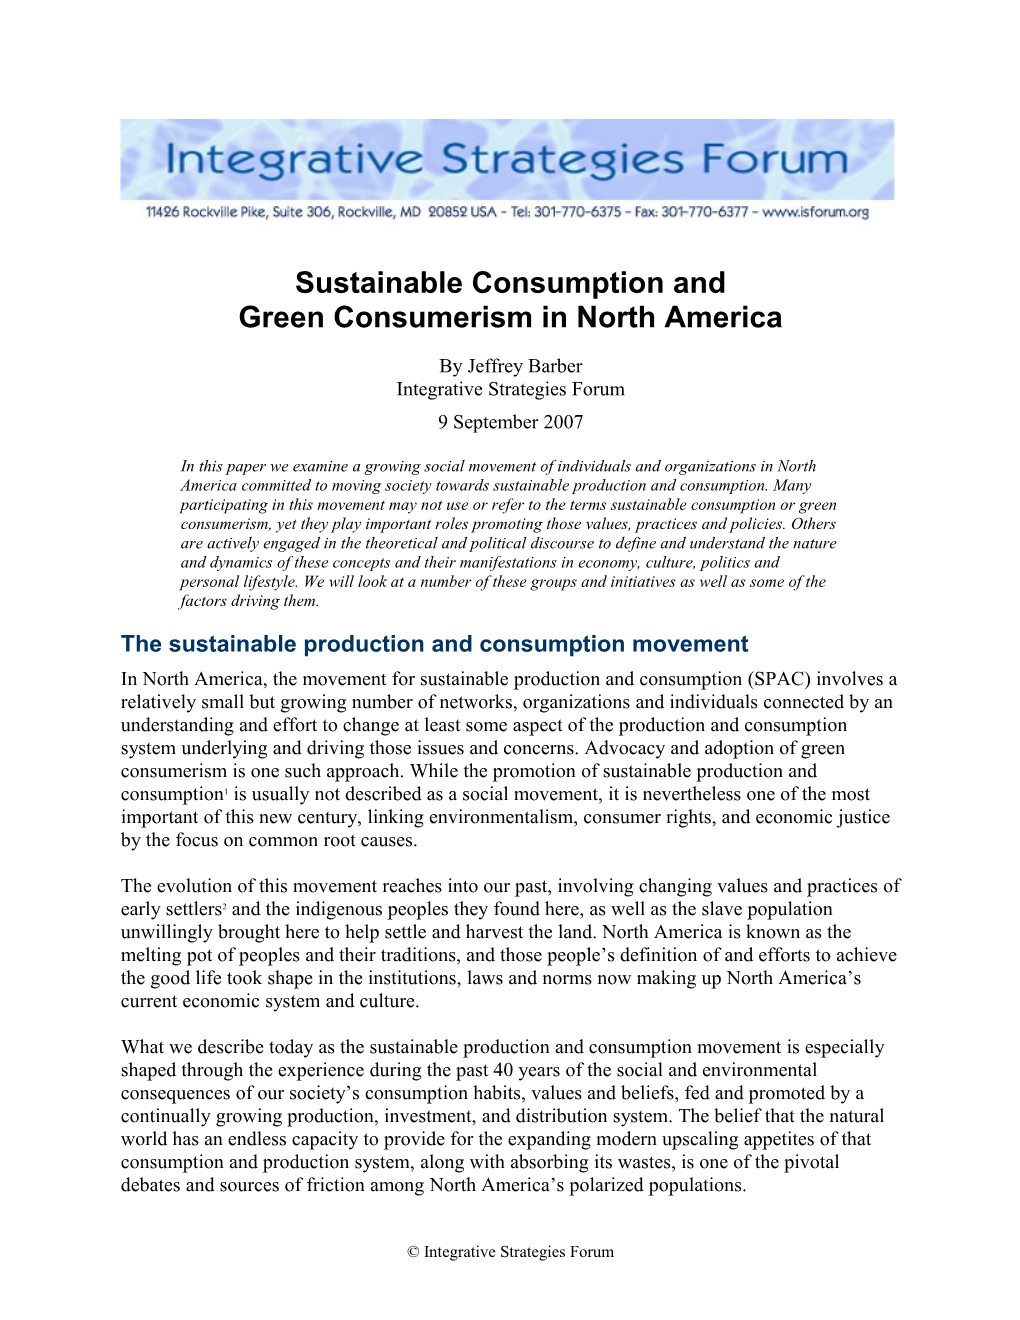 Sustainable Consumption and Green Consumerism in North America